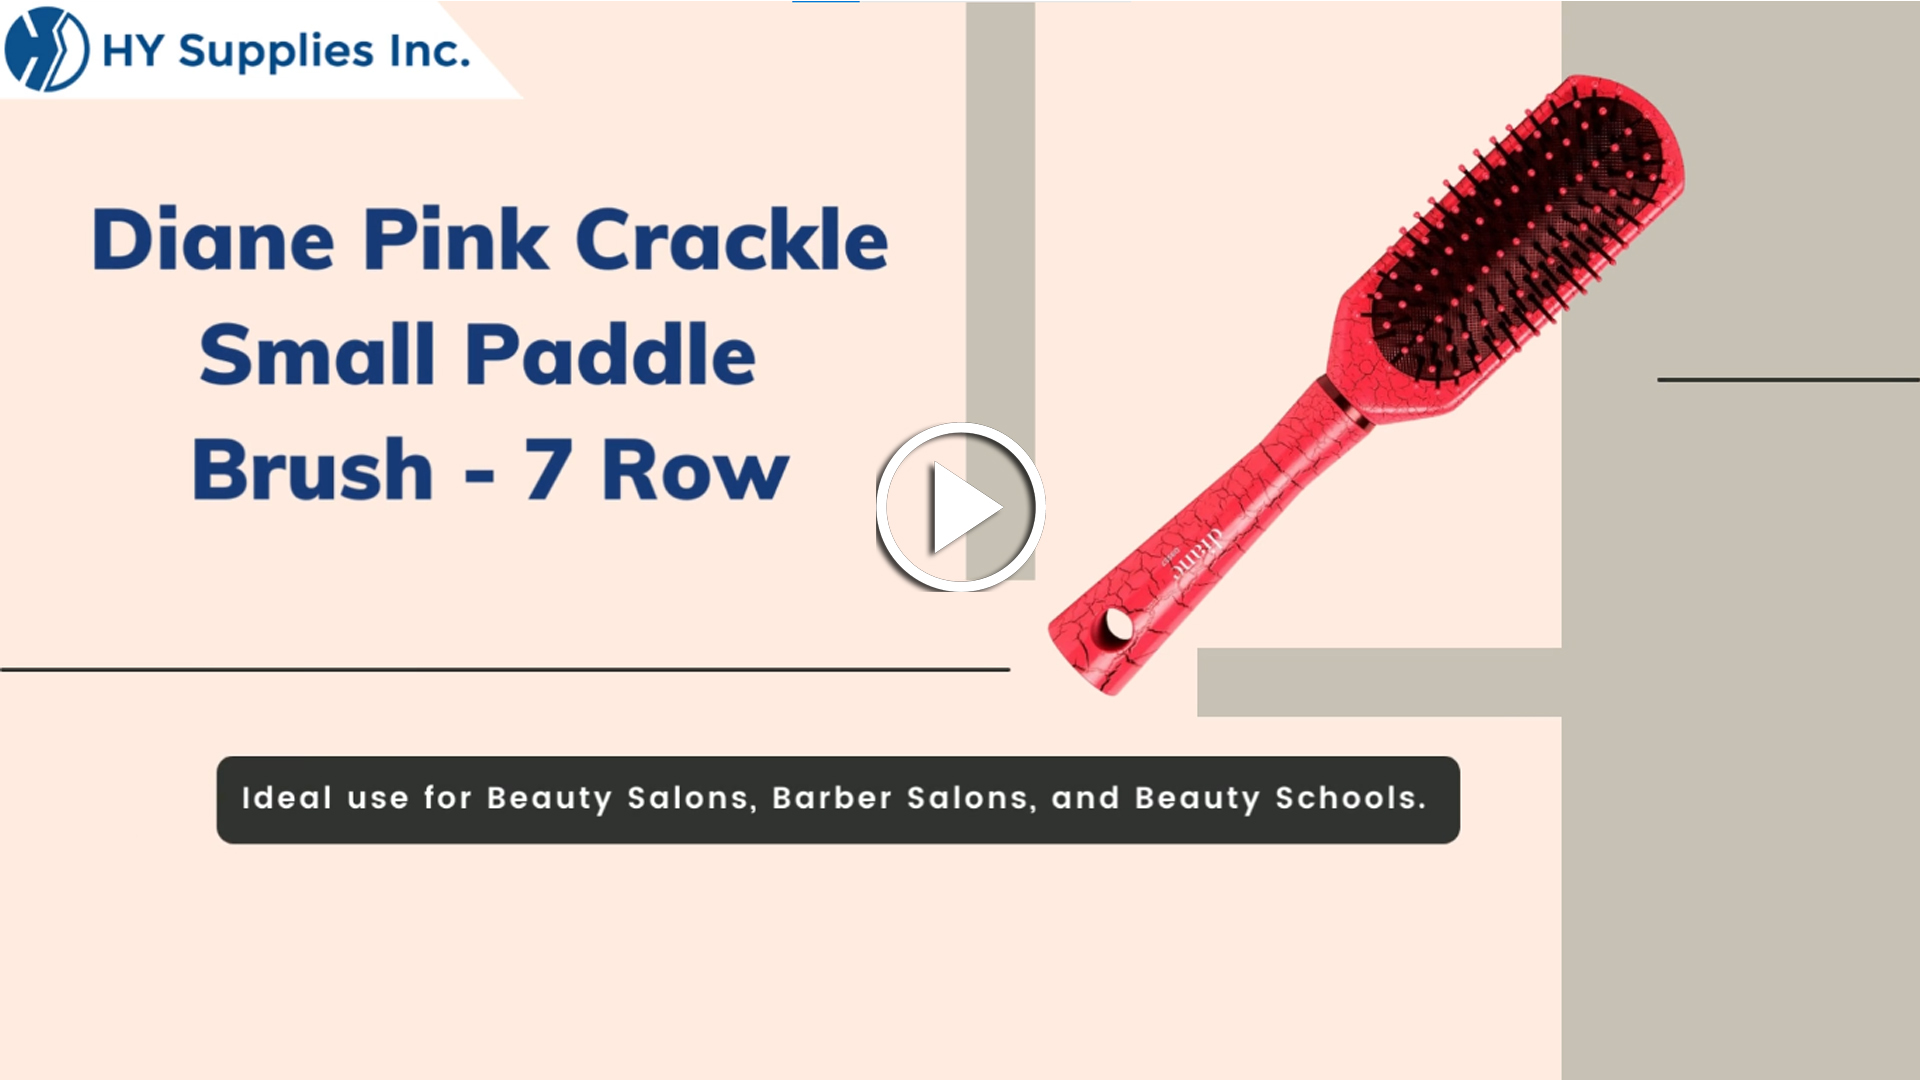 Diane Pink Crackle Small Paddle Brush - 7 Row